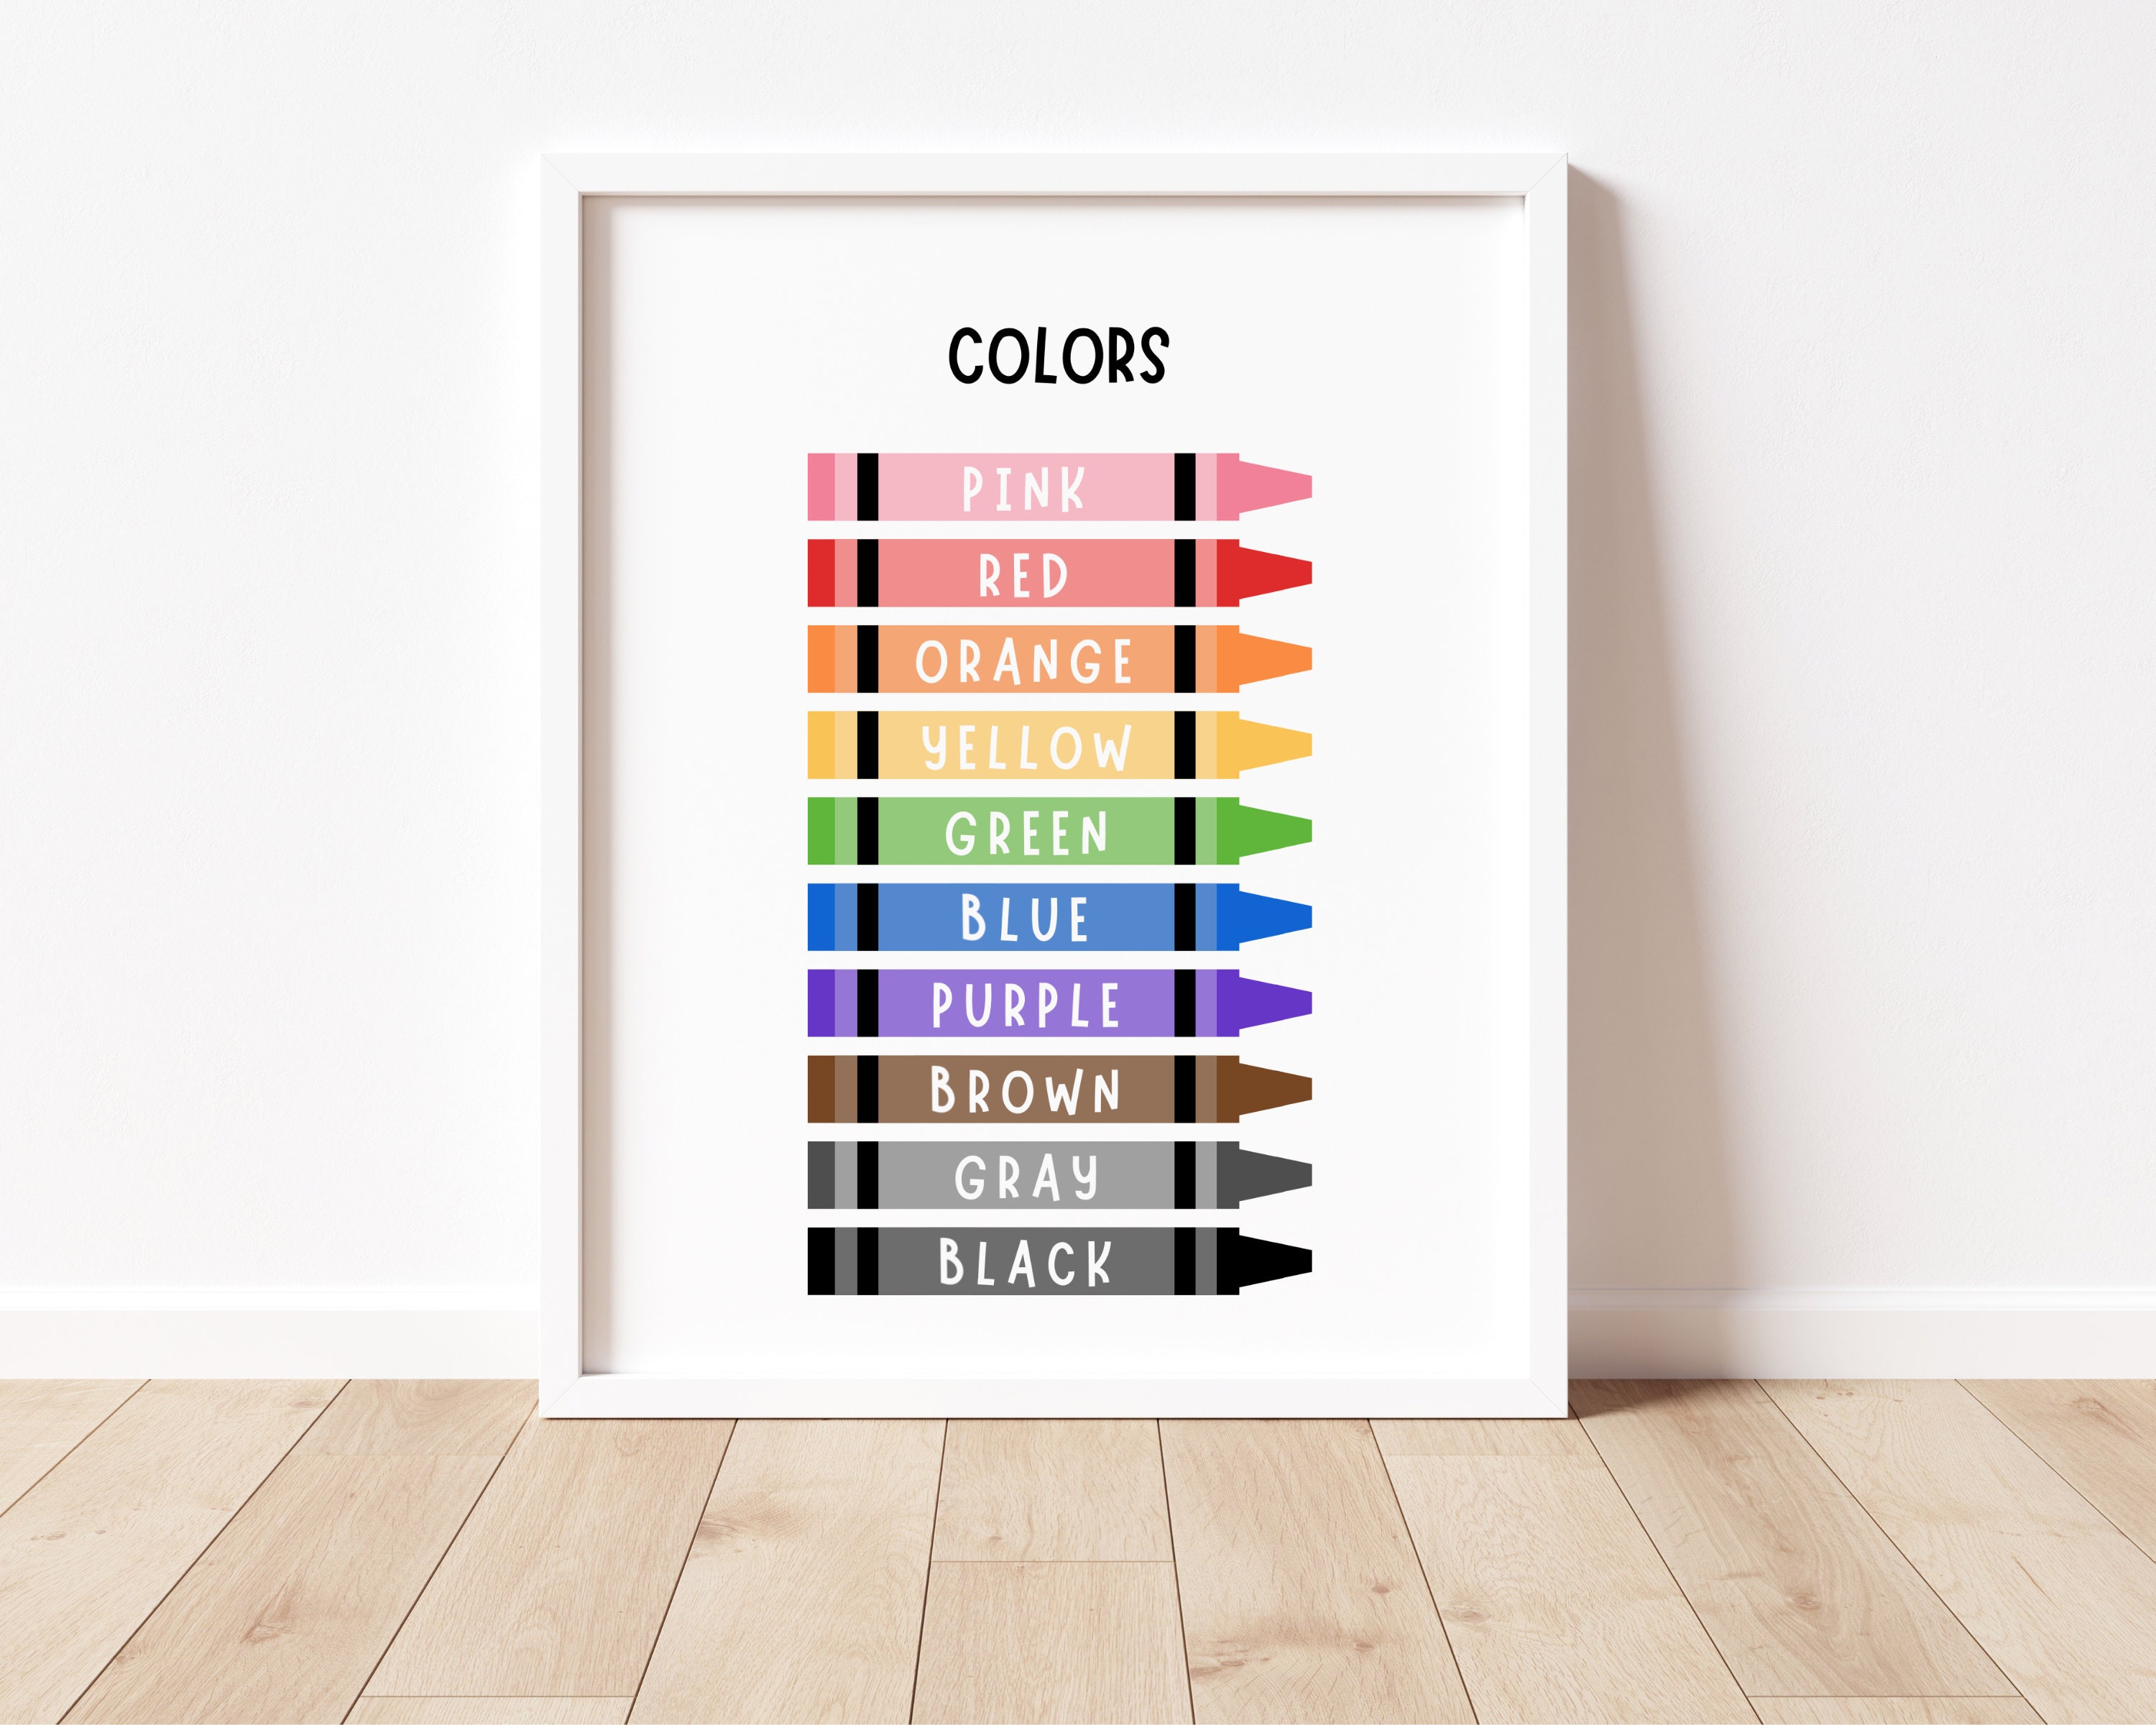 Poster Colors - Buy Poster Colors Online Starting at Just ₹90